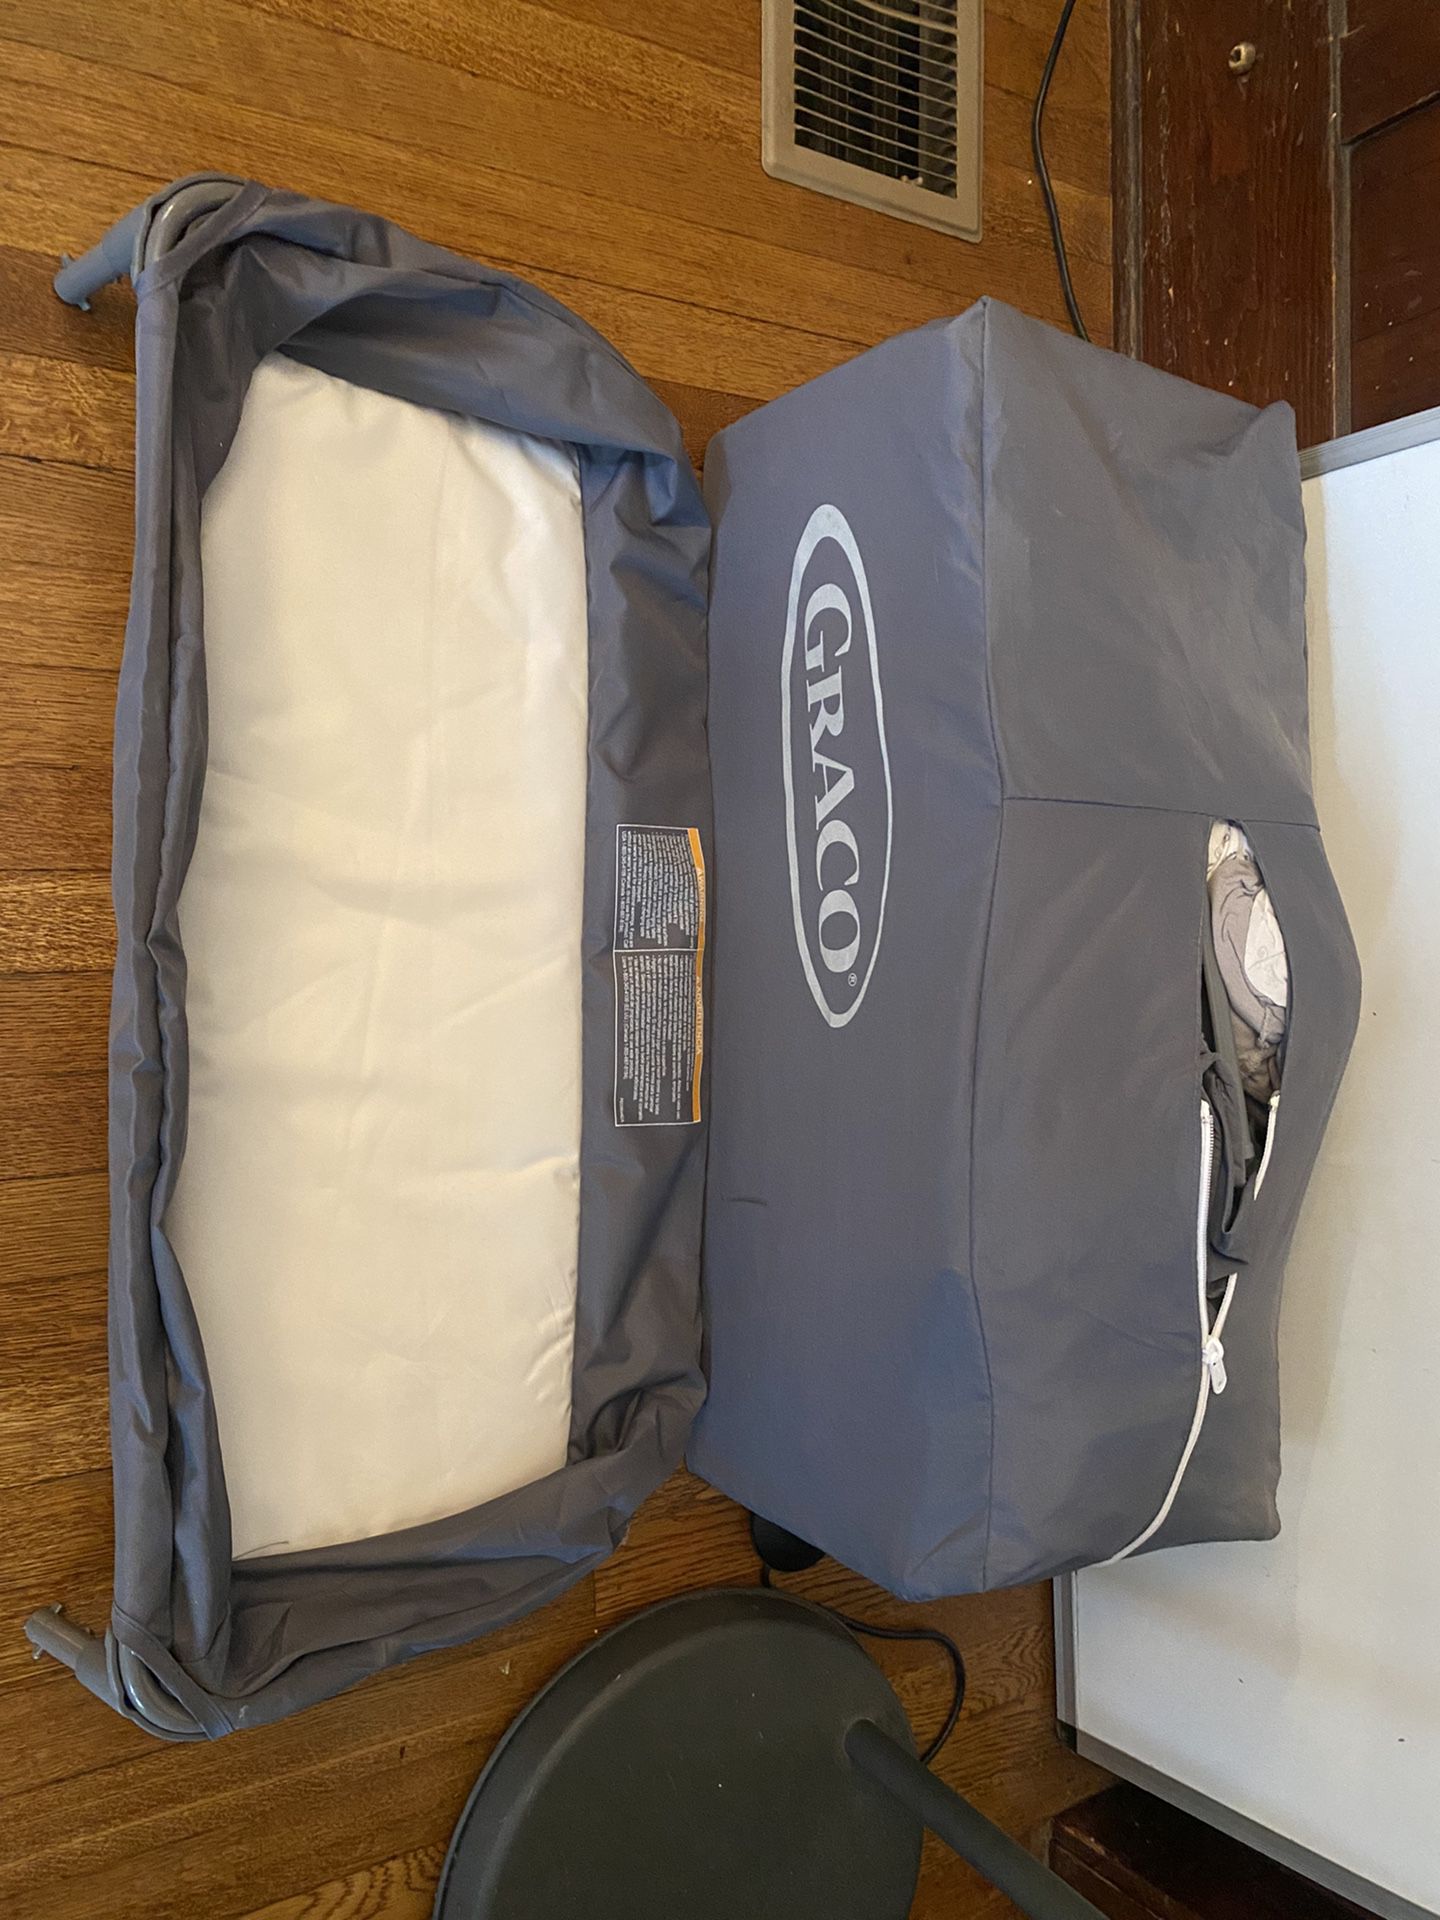 Pack n play with newborn bassinet